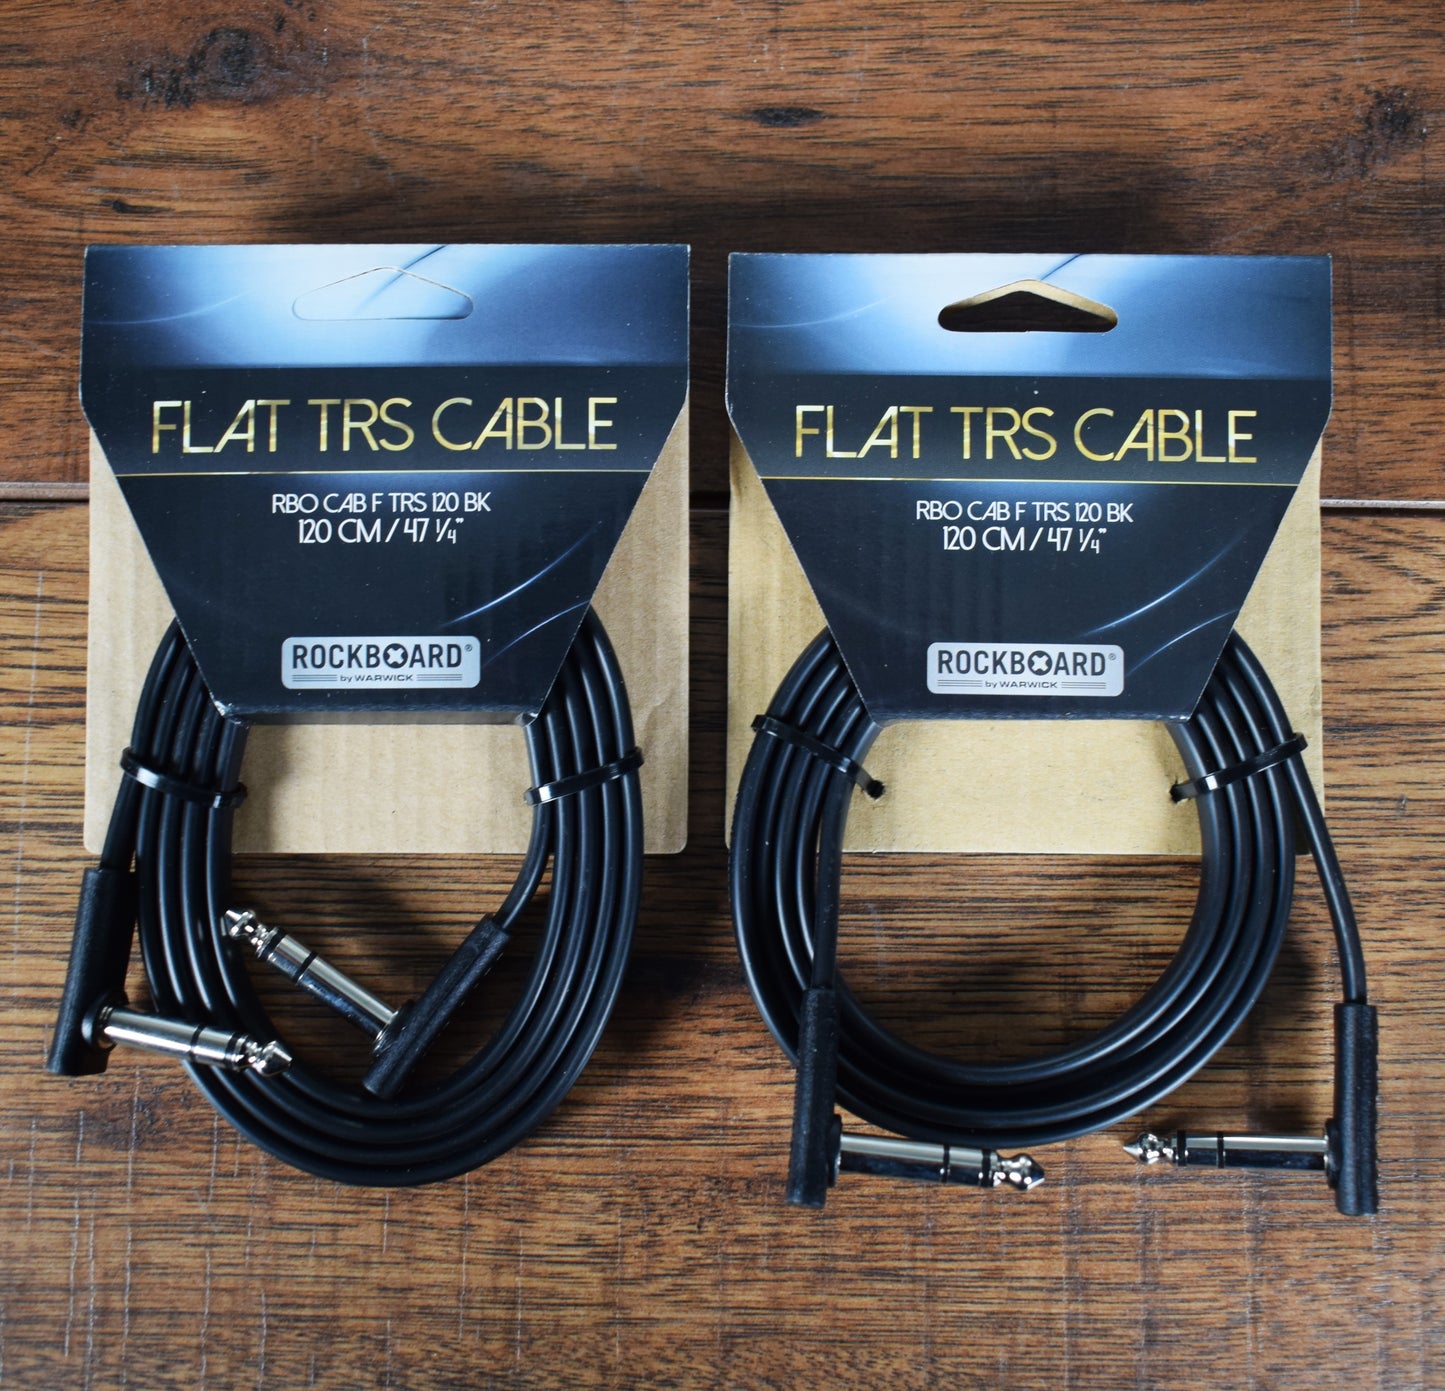 Warwick Rockboard Flat Patch TRS Guitar Bass Pedalboard Expression Cable 120CM 3.93' Black 2 Pack